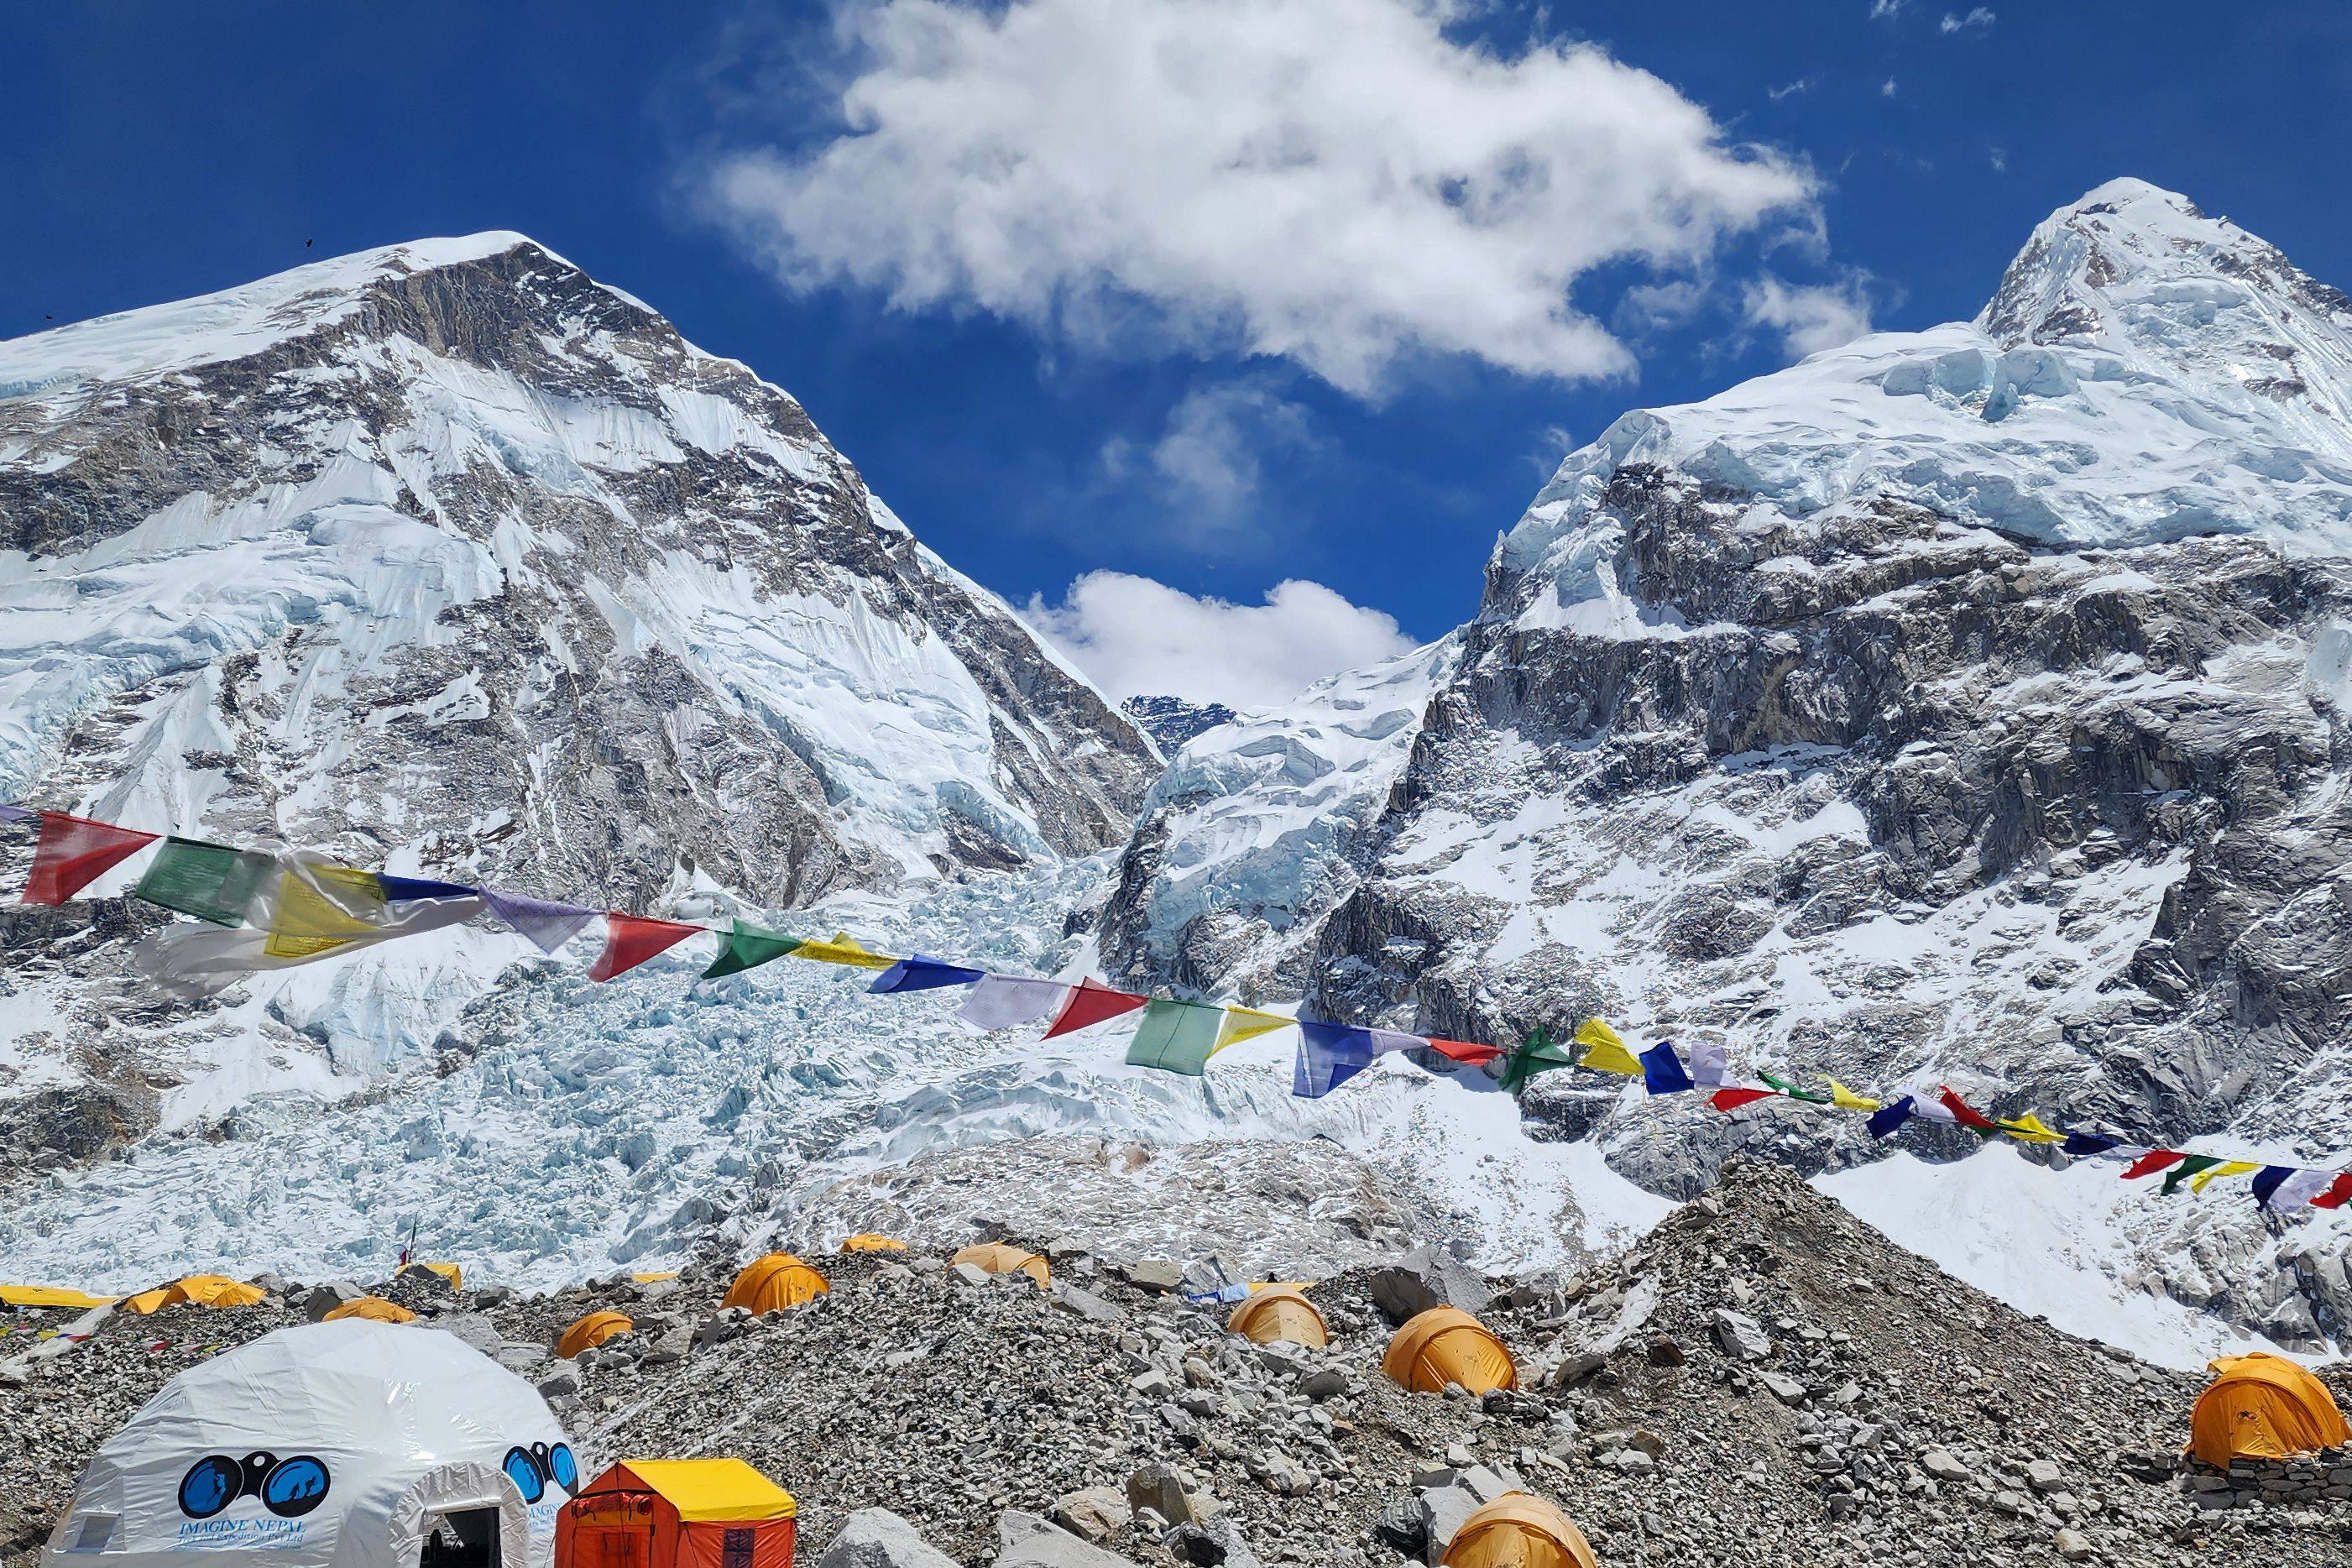 Tents of climbers are pictured at the Everest base camp. Photo: AFP